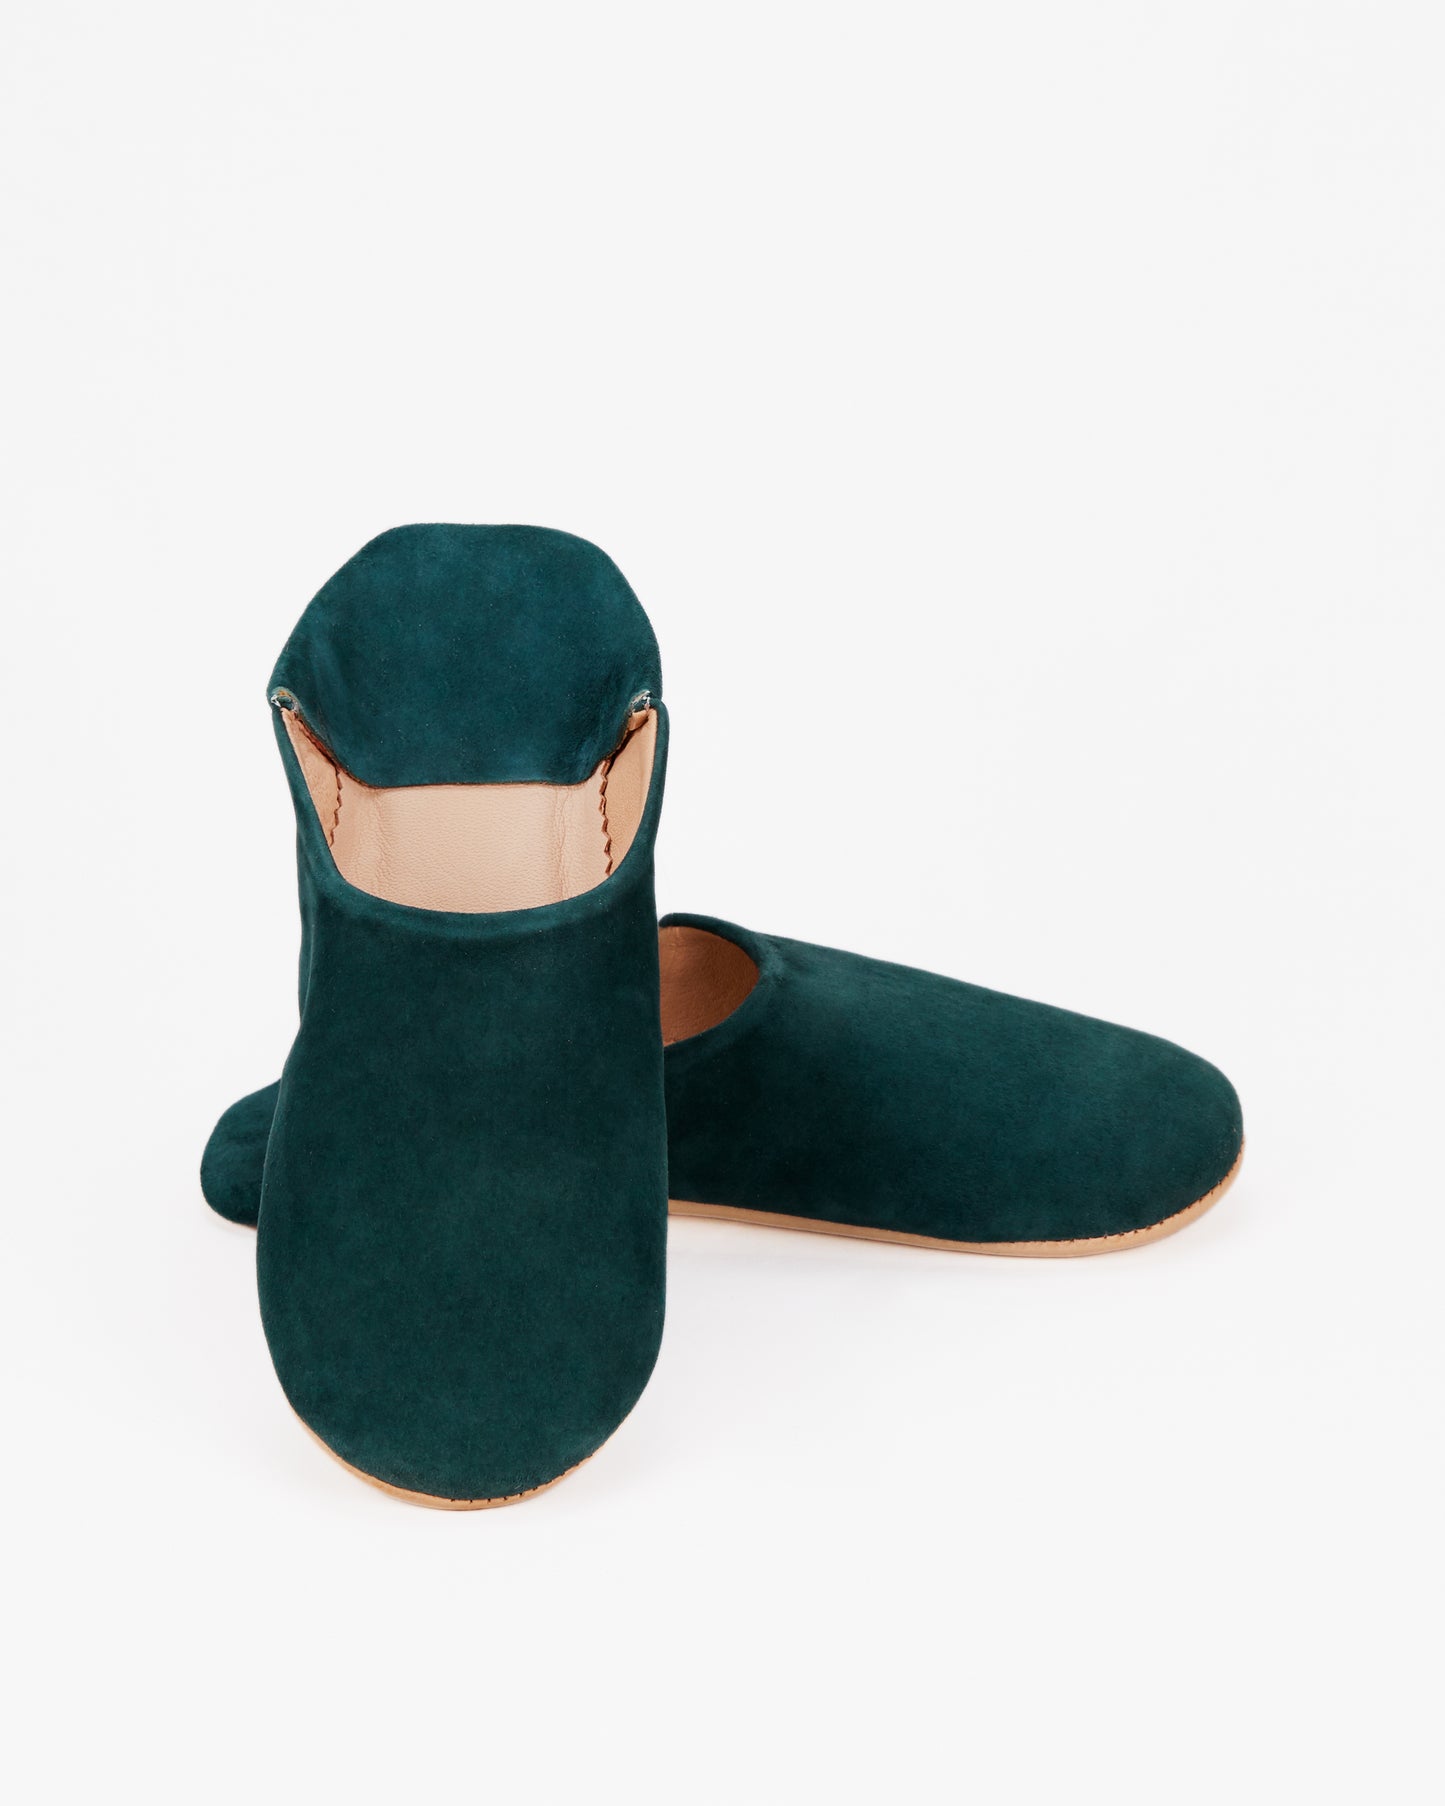 Moroccan Slippers, Teal/Plain